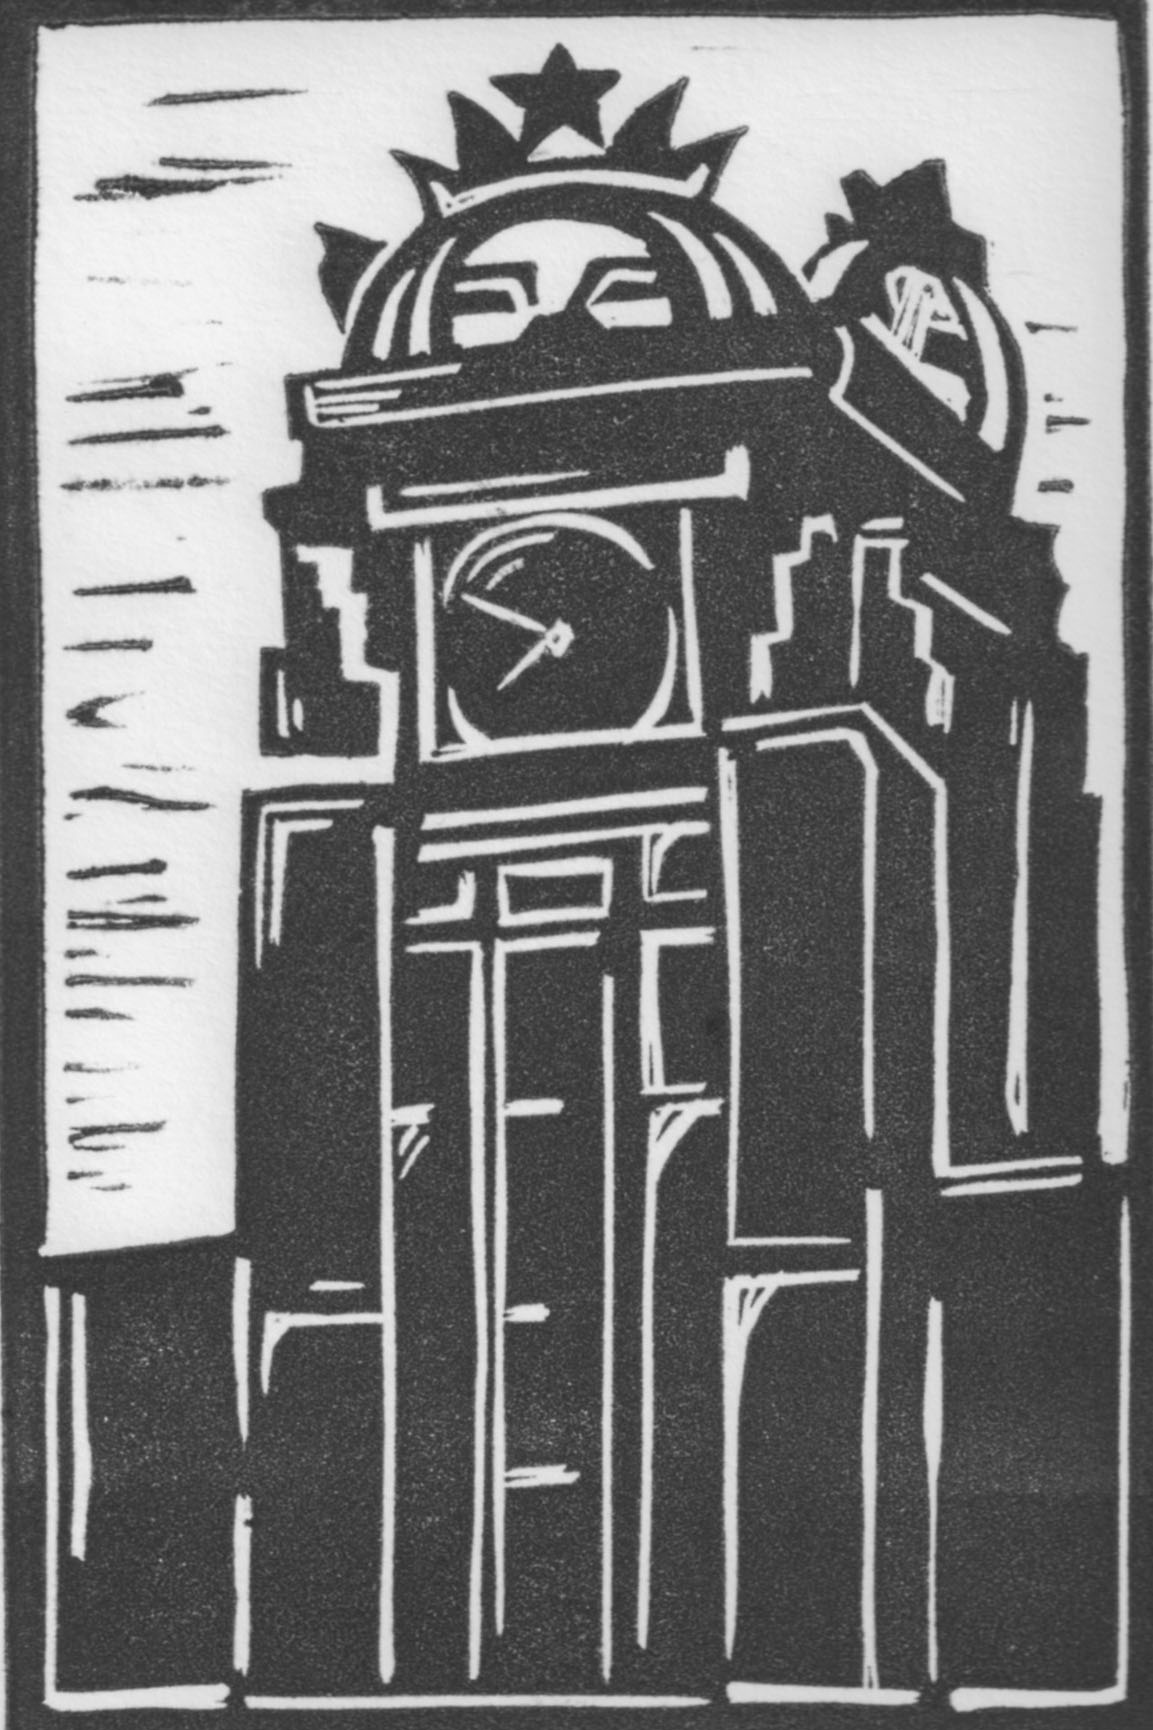 Black and white linocut print depicting the Starbuck's Headquarters clock tower in Seattle